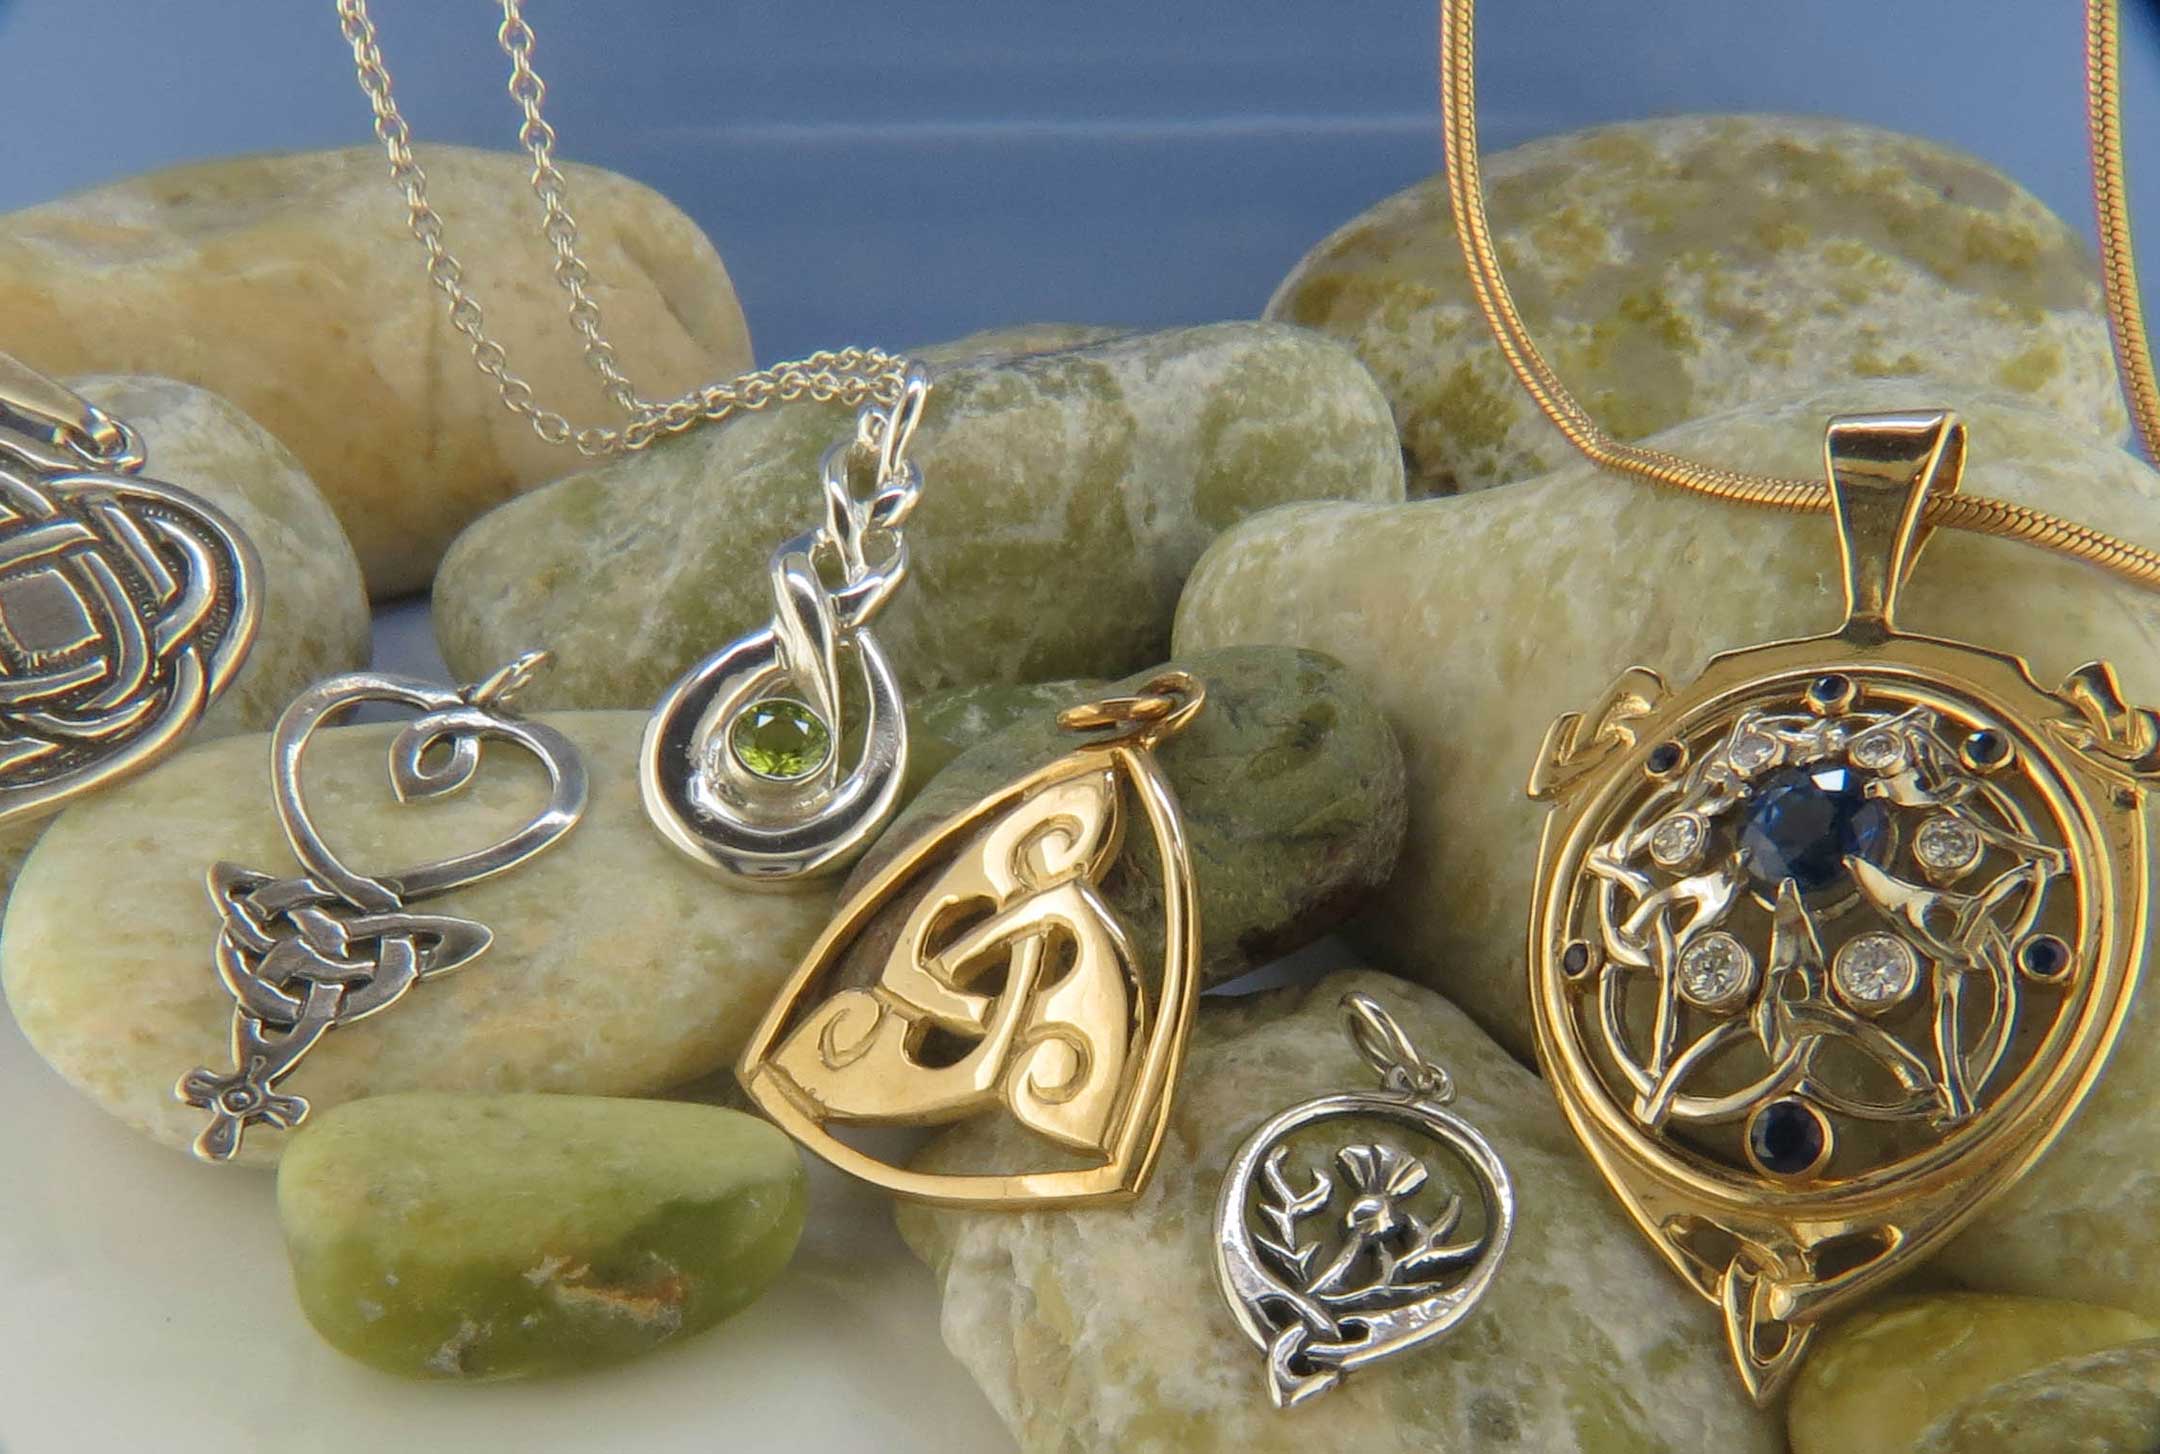 Unique Celtic jewelry in sterling silver and 14K gold crafted by Walker Metalsmiths.